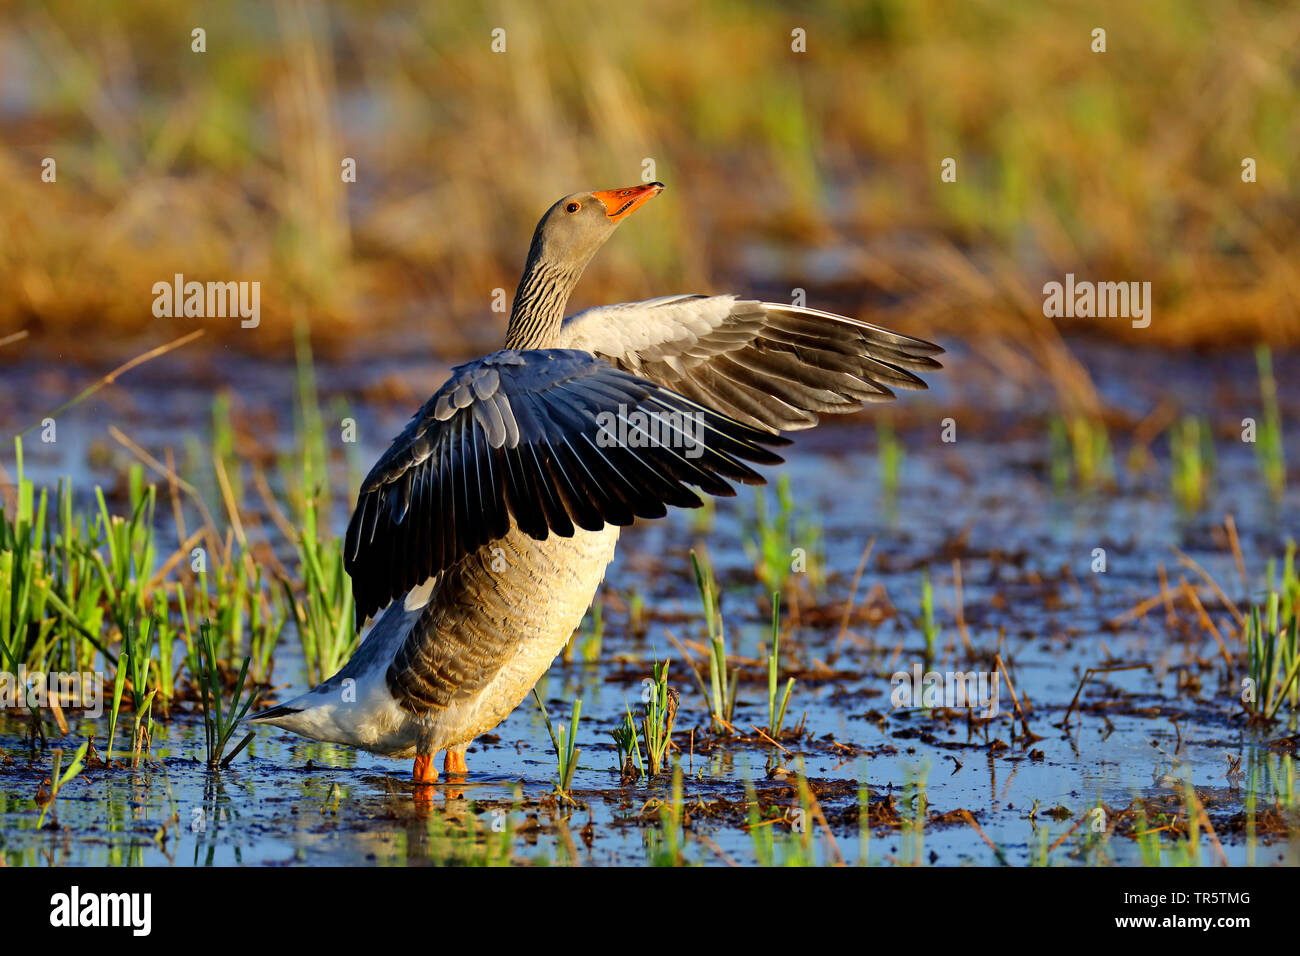 greylag goose (Anser anser), standing in shallow water and fluttering, side view, Netherlands, Groningen Stock Photo